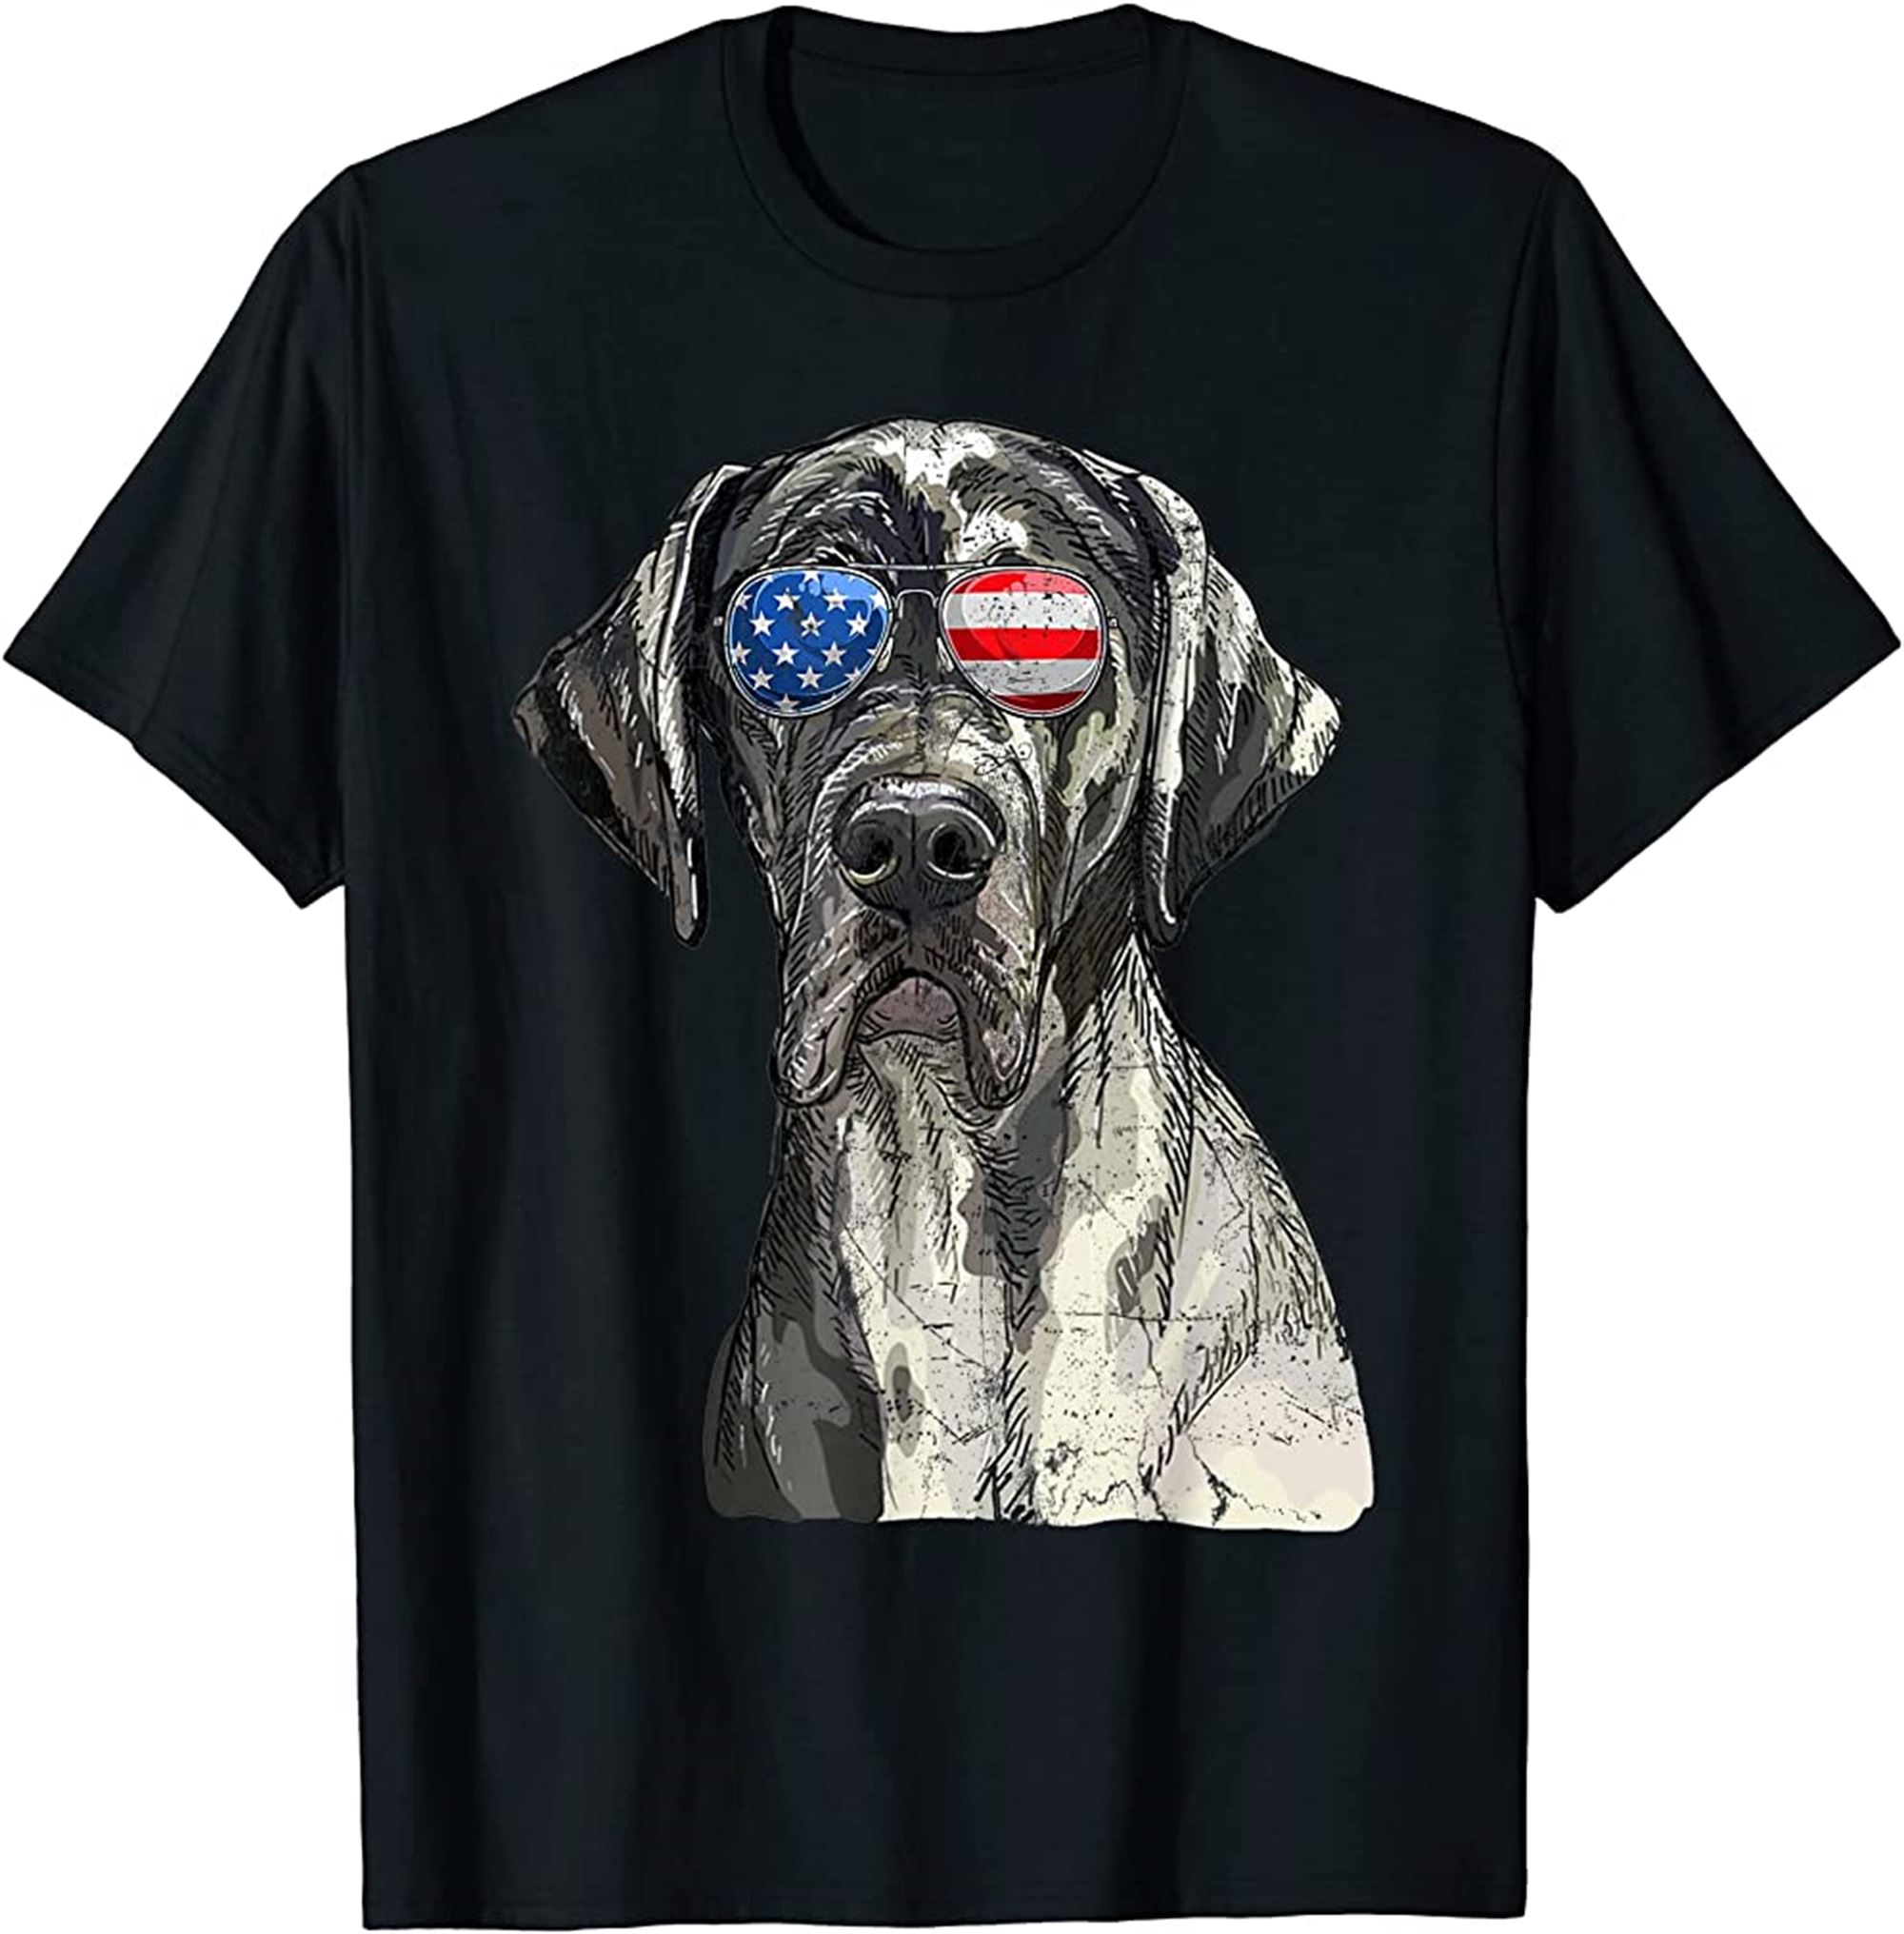 Great Dane Sunglasses American Usa Flag 4th Of July Fourth T-shirt Plus Size Up To 5xl